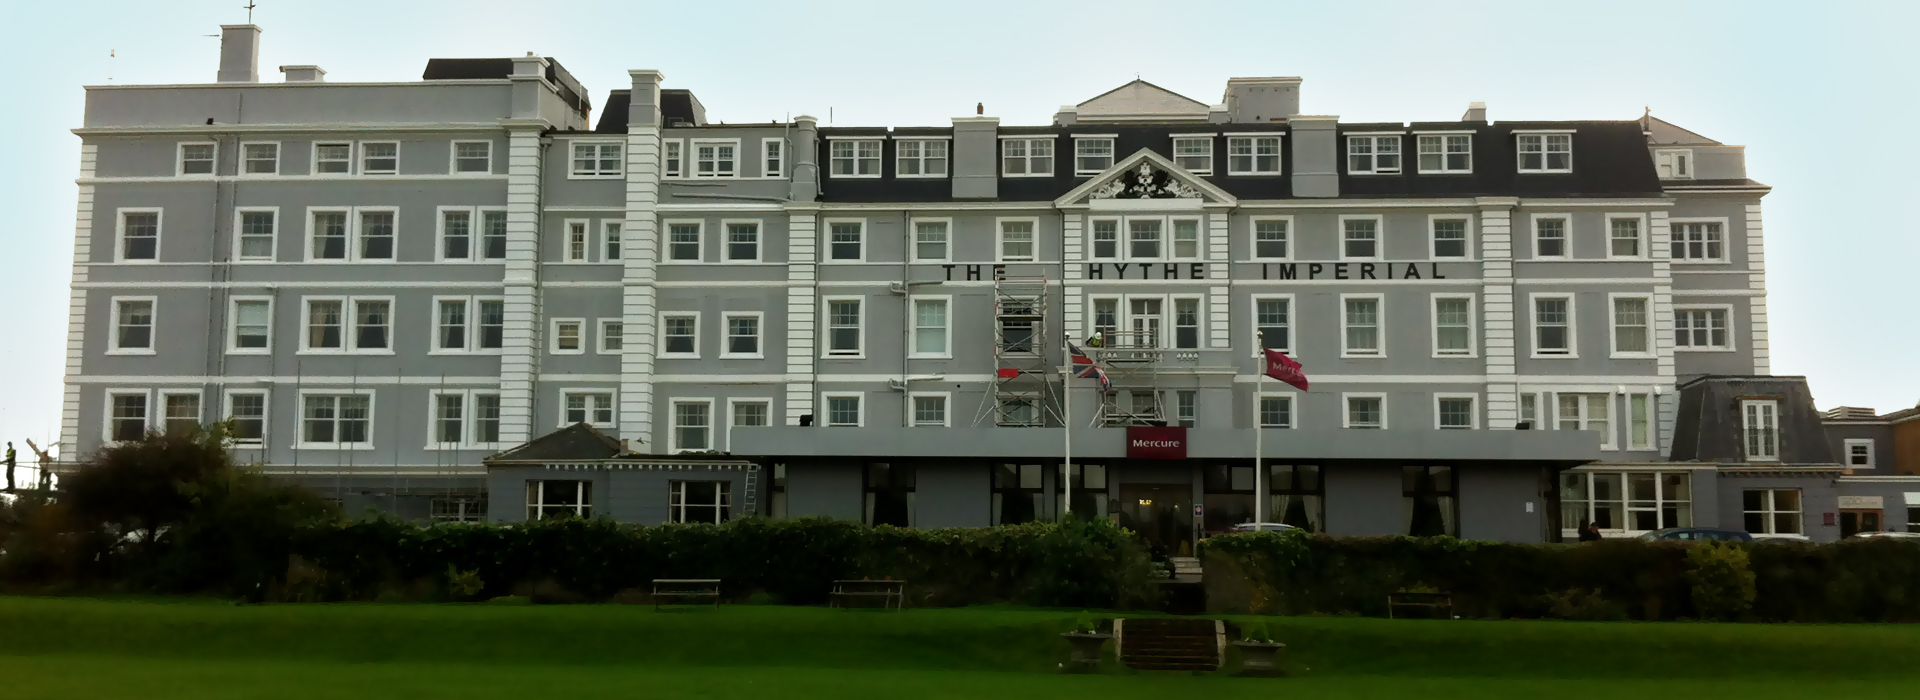 Painting and Decorating Services - Hythe Imperial Hotel